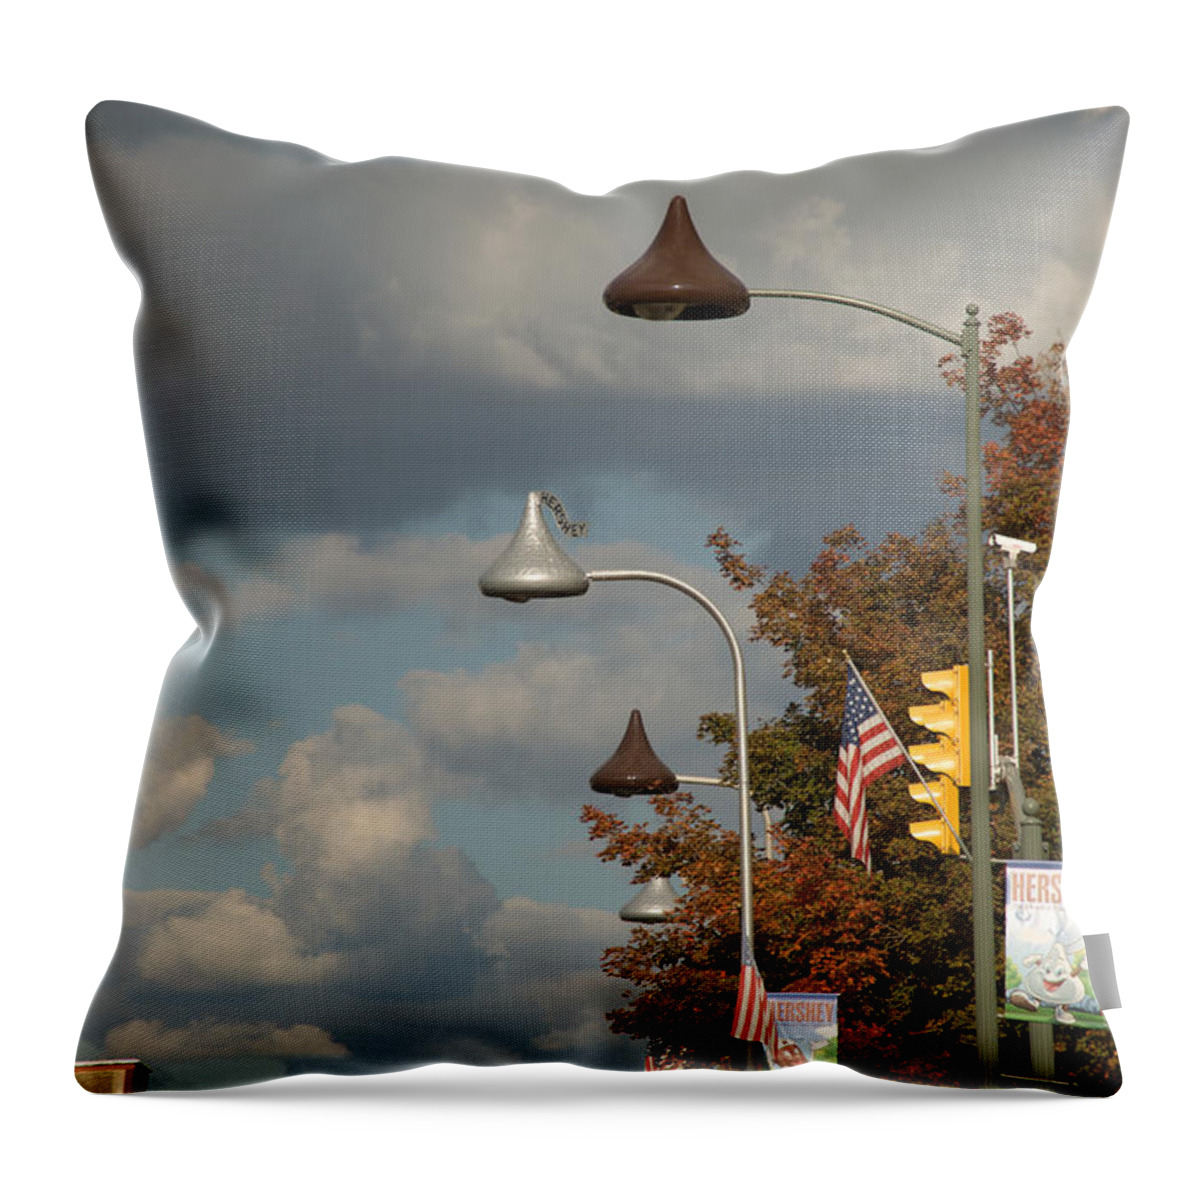 Hershey Throw Pillow featuring the photograph Unwrapped Wrapped Unwrapped Wrapped and on and on by Mark Dodd